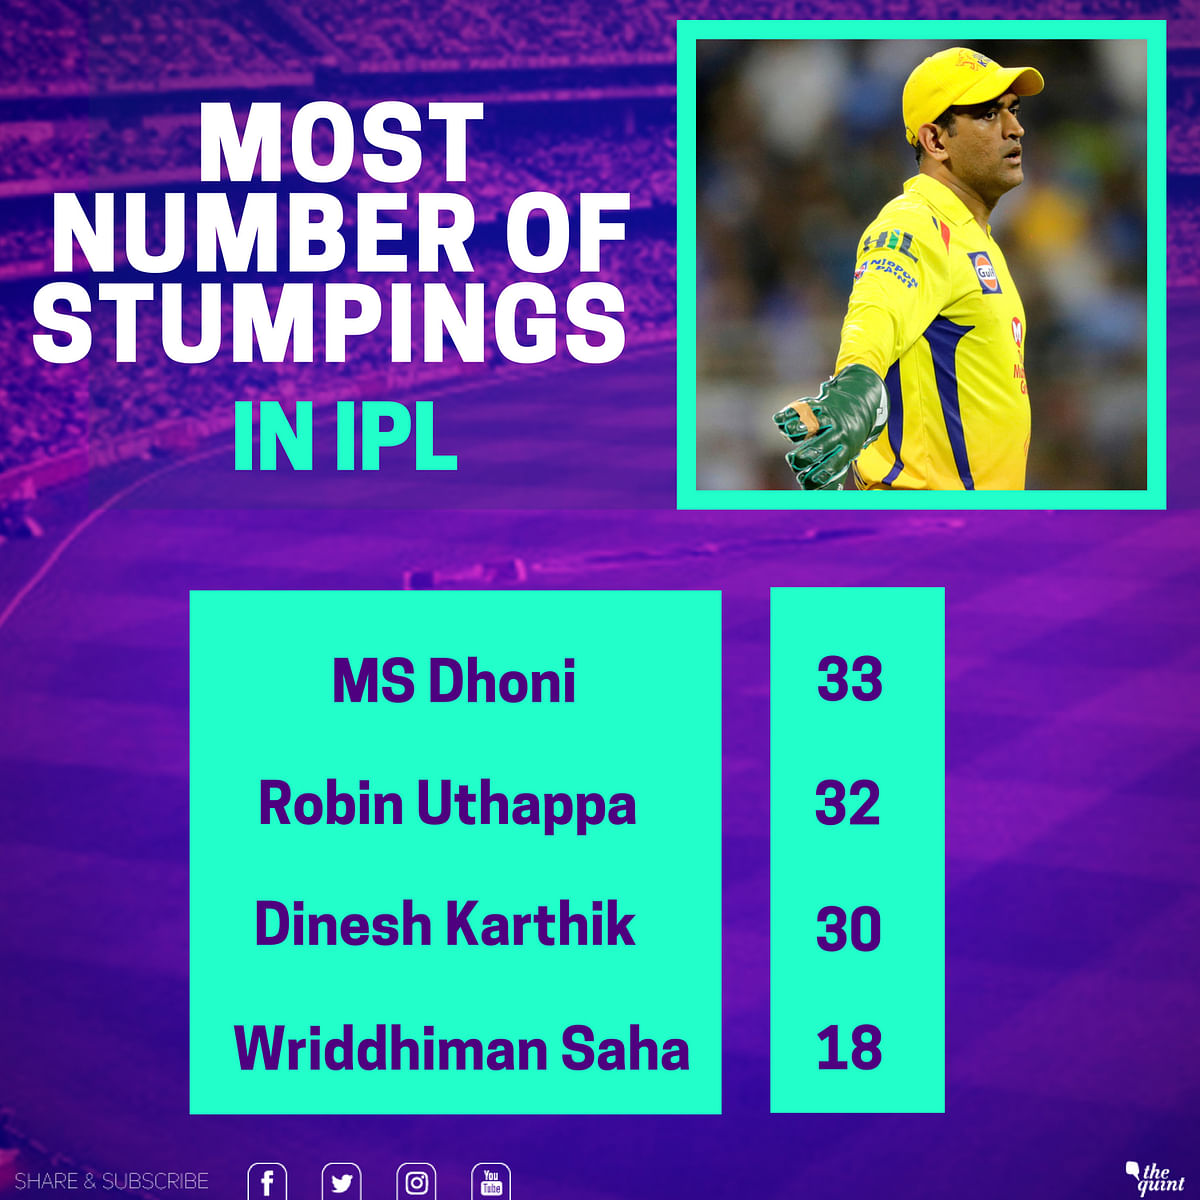 MS Dhoni led Chennai Super Kings to their third Indian Premier League title on 27 May.